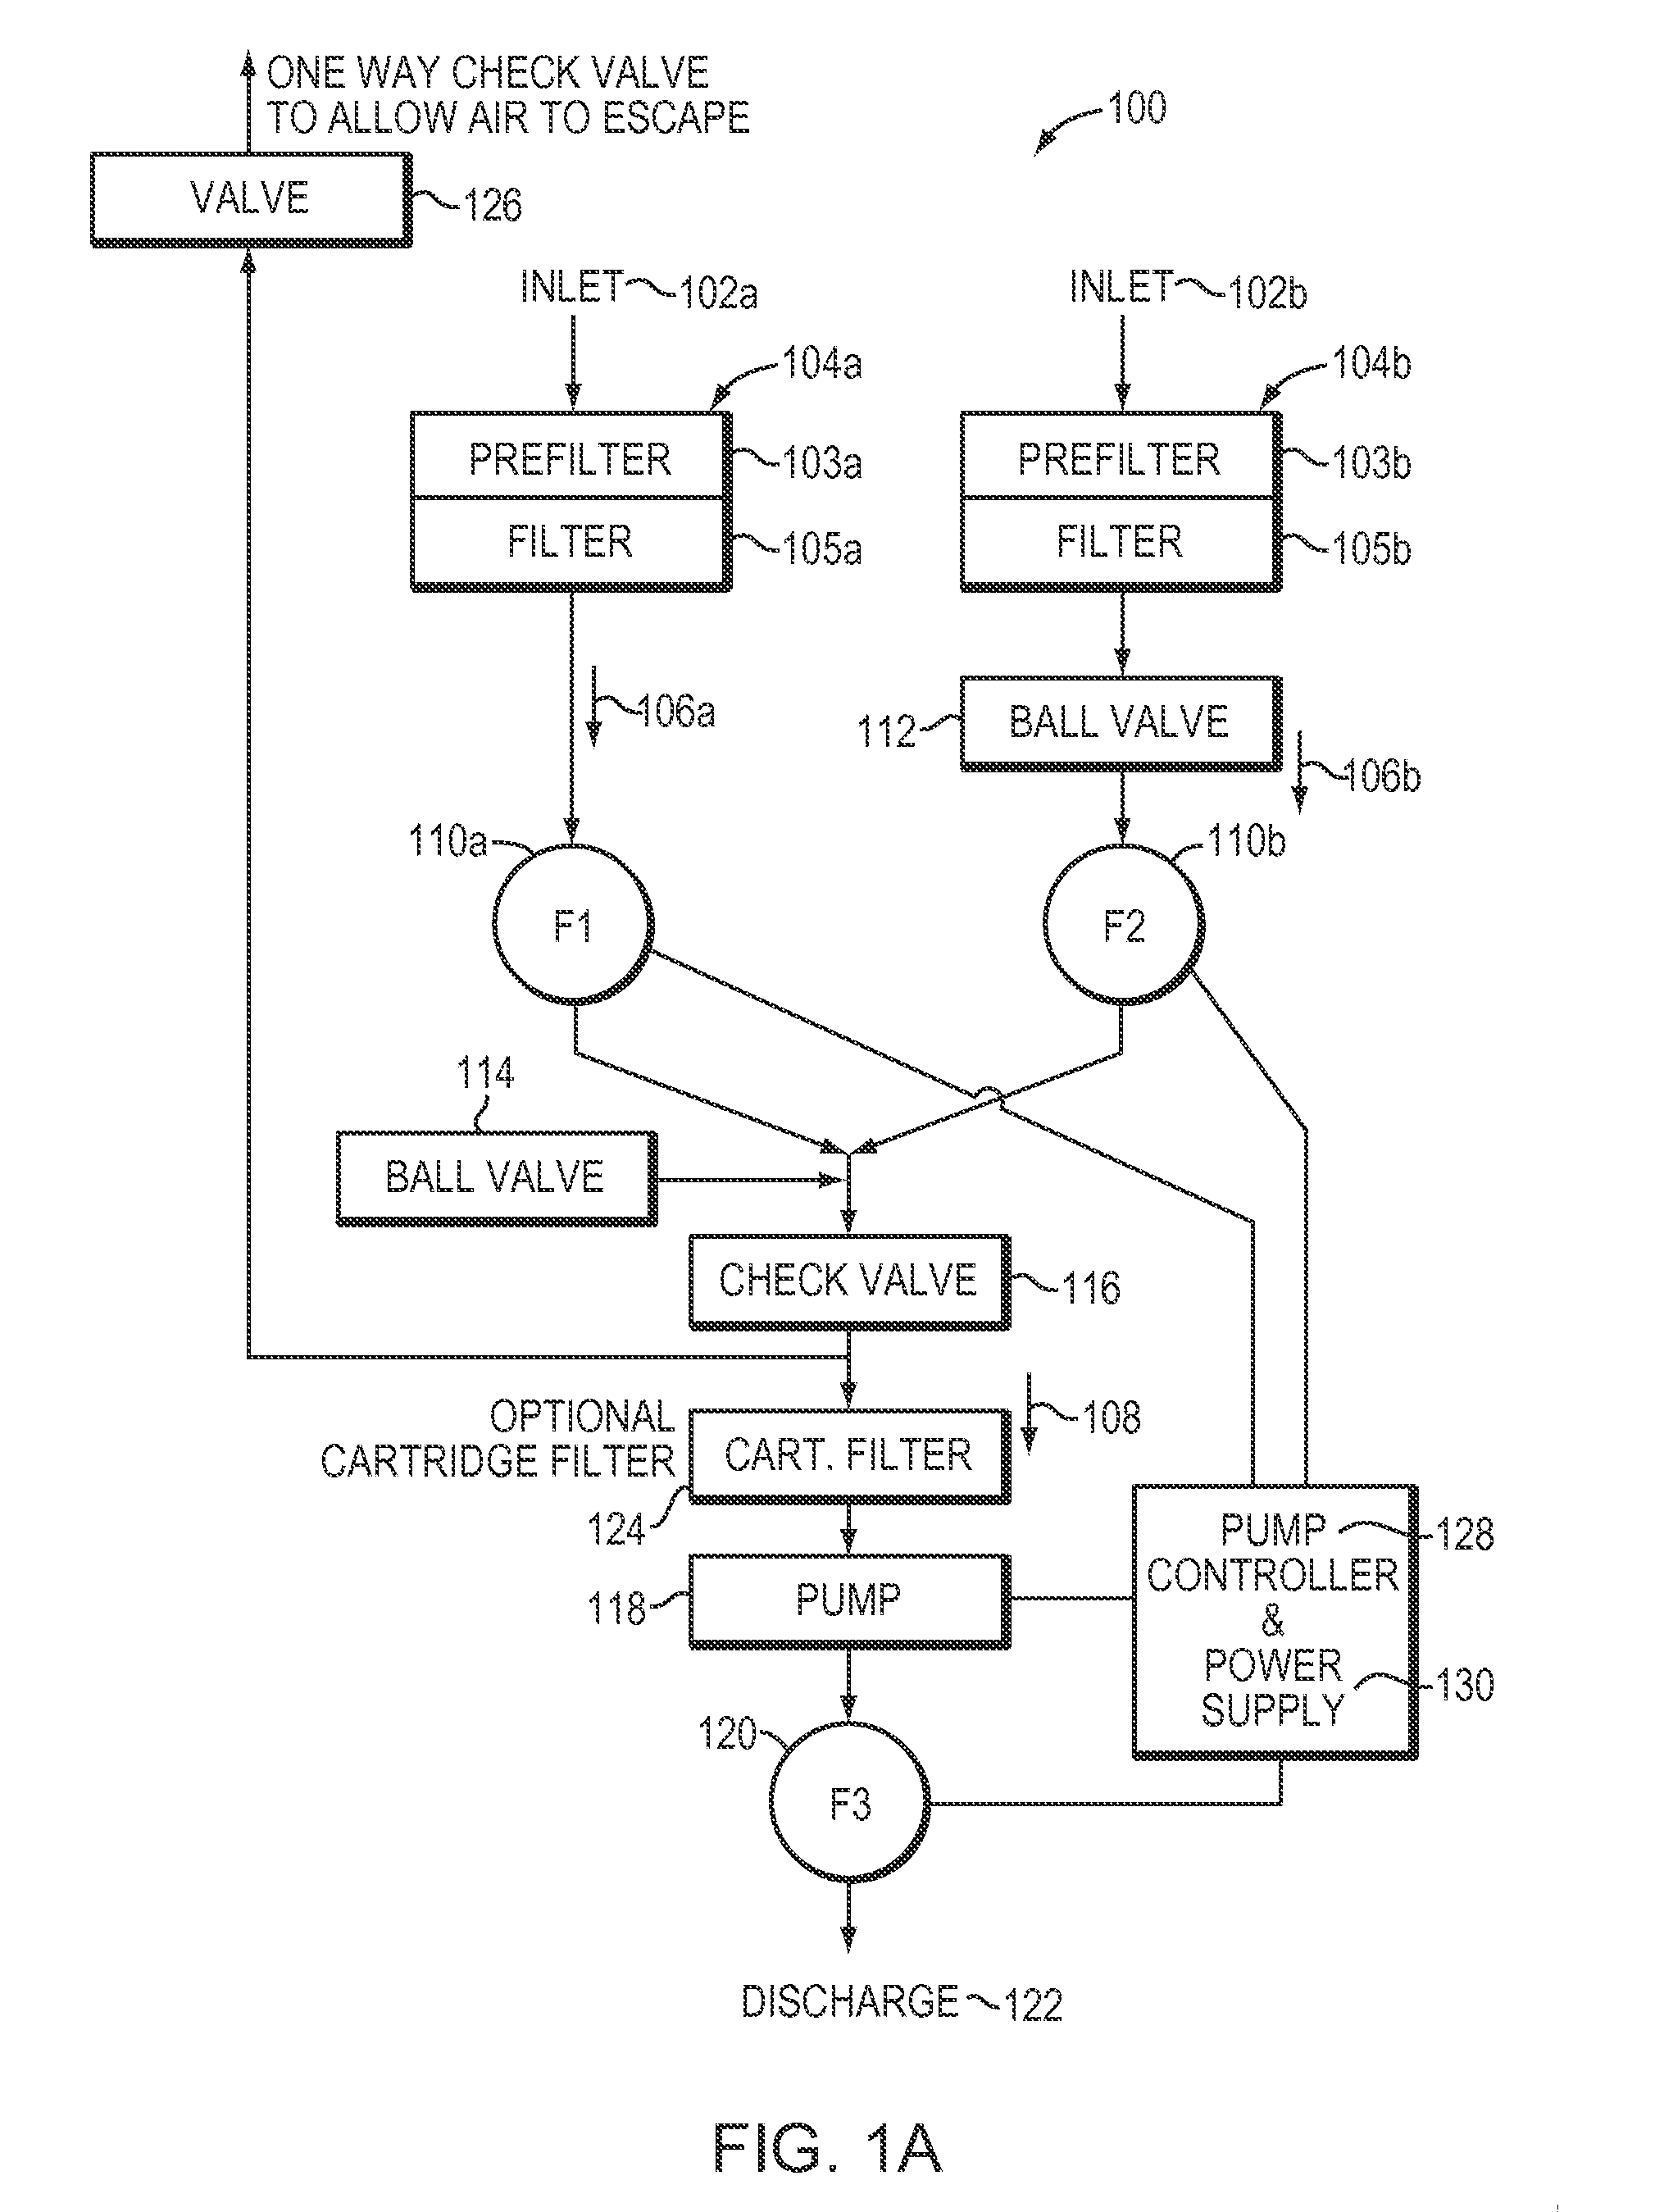 In situ marine sample collection system and methods